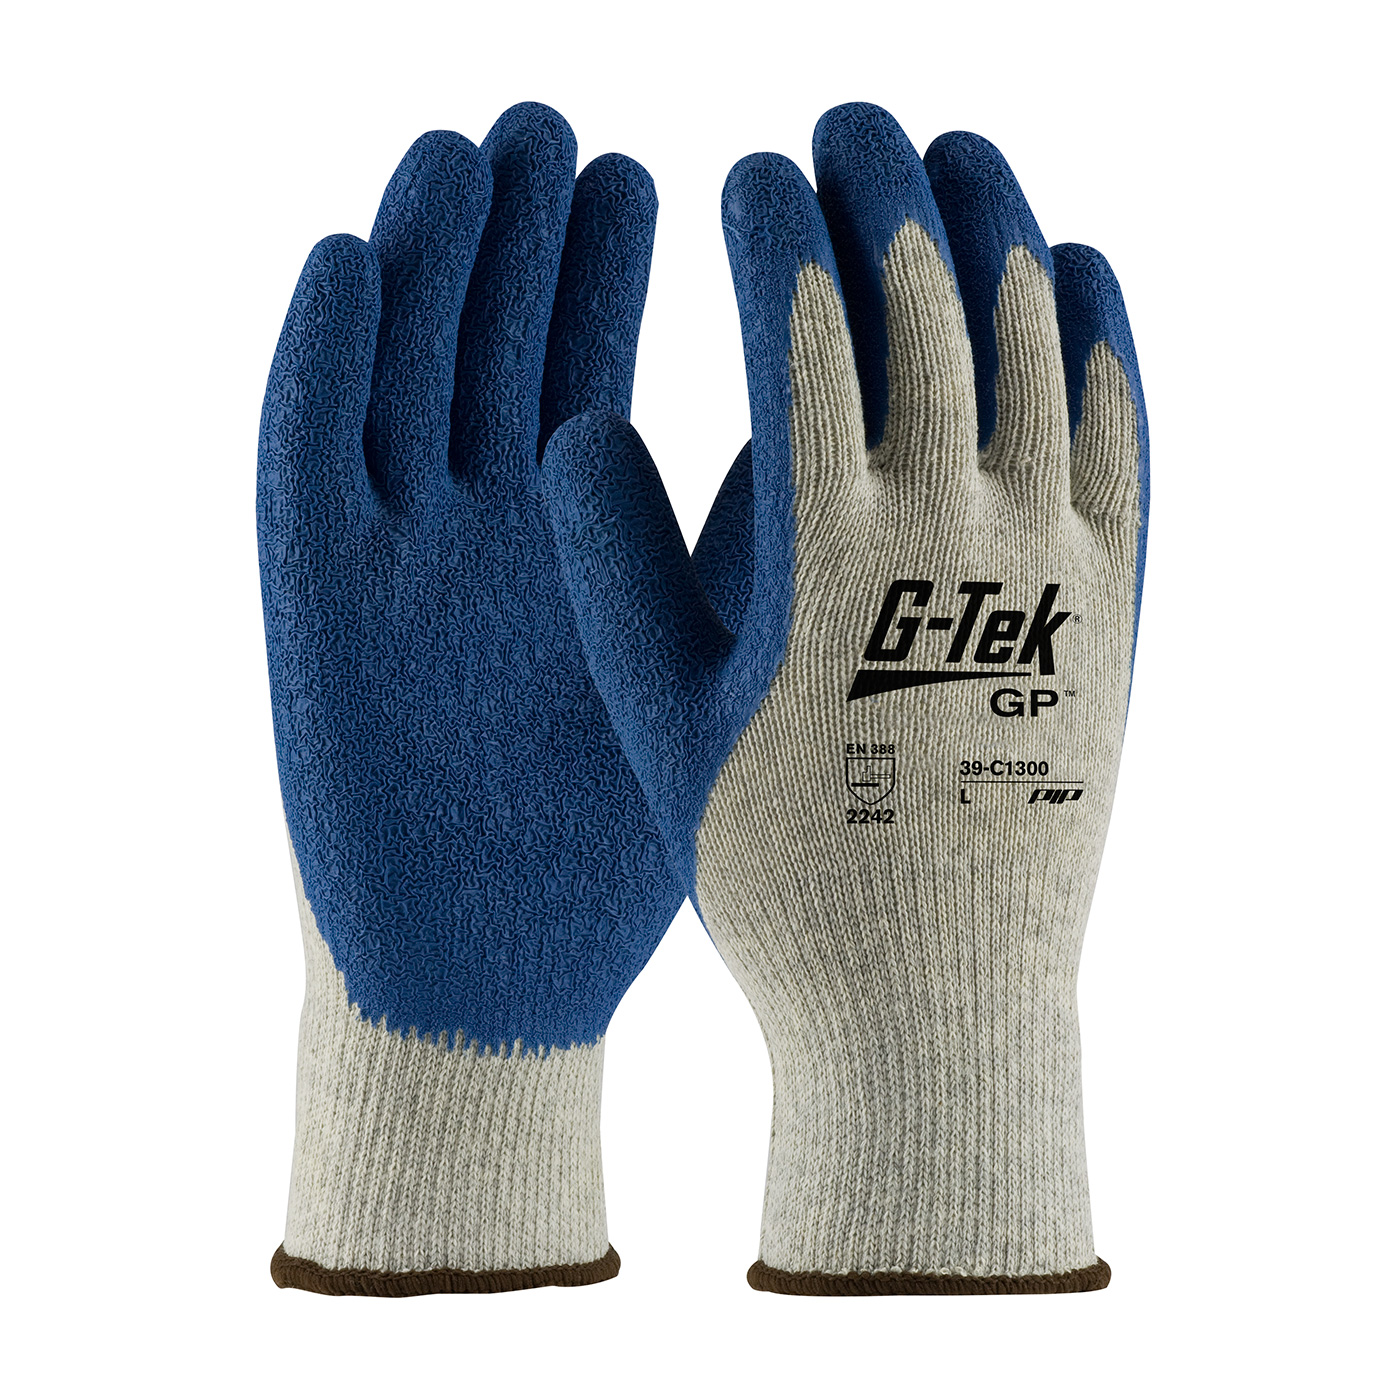 PIP 39-C1300/L G-Tek GP Seamless Knit Cotton/Polyester Glove with Latex Coated Crinkle Grip on Palm & Fingers - Premium Grade - Large PID-39 C1300 L